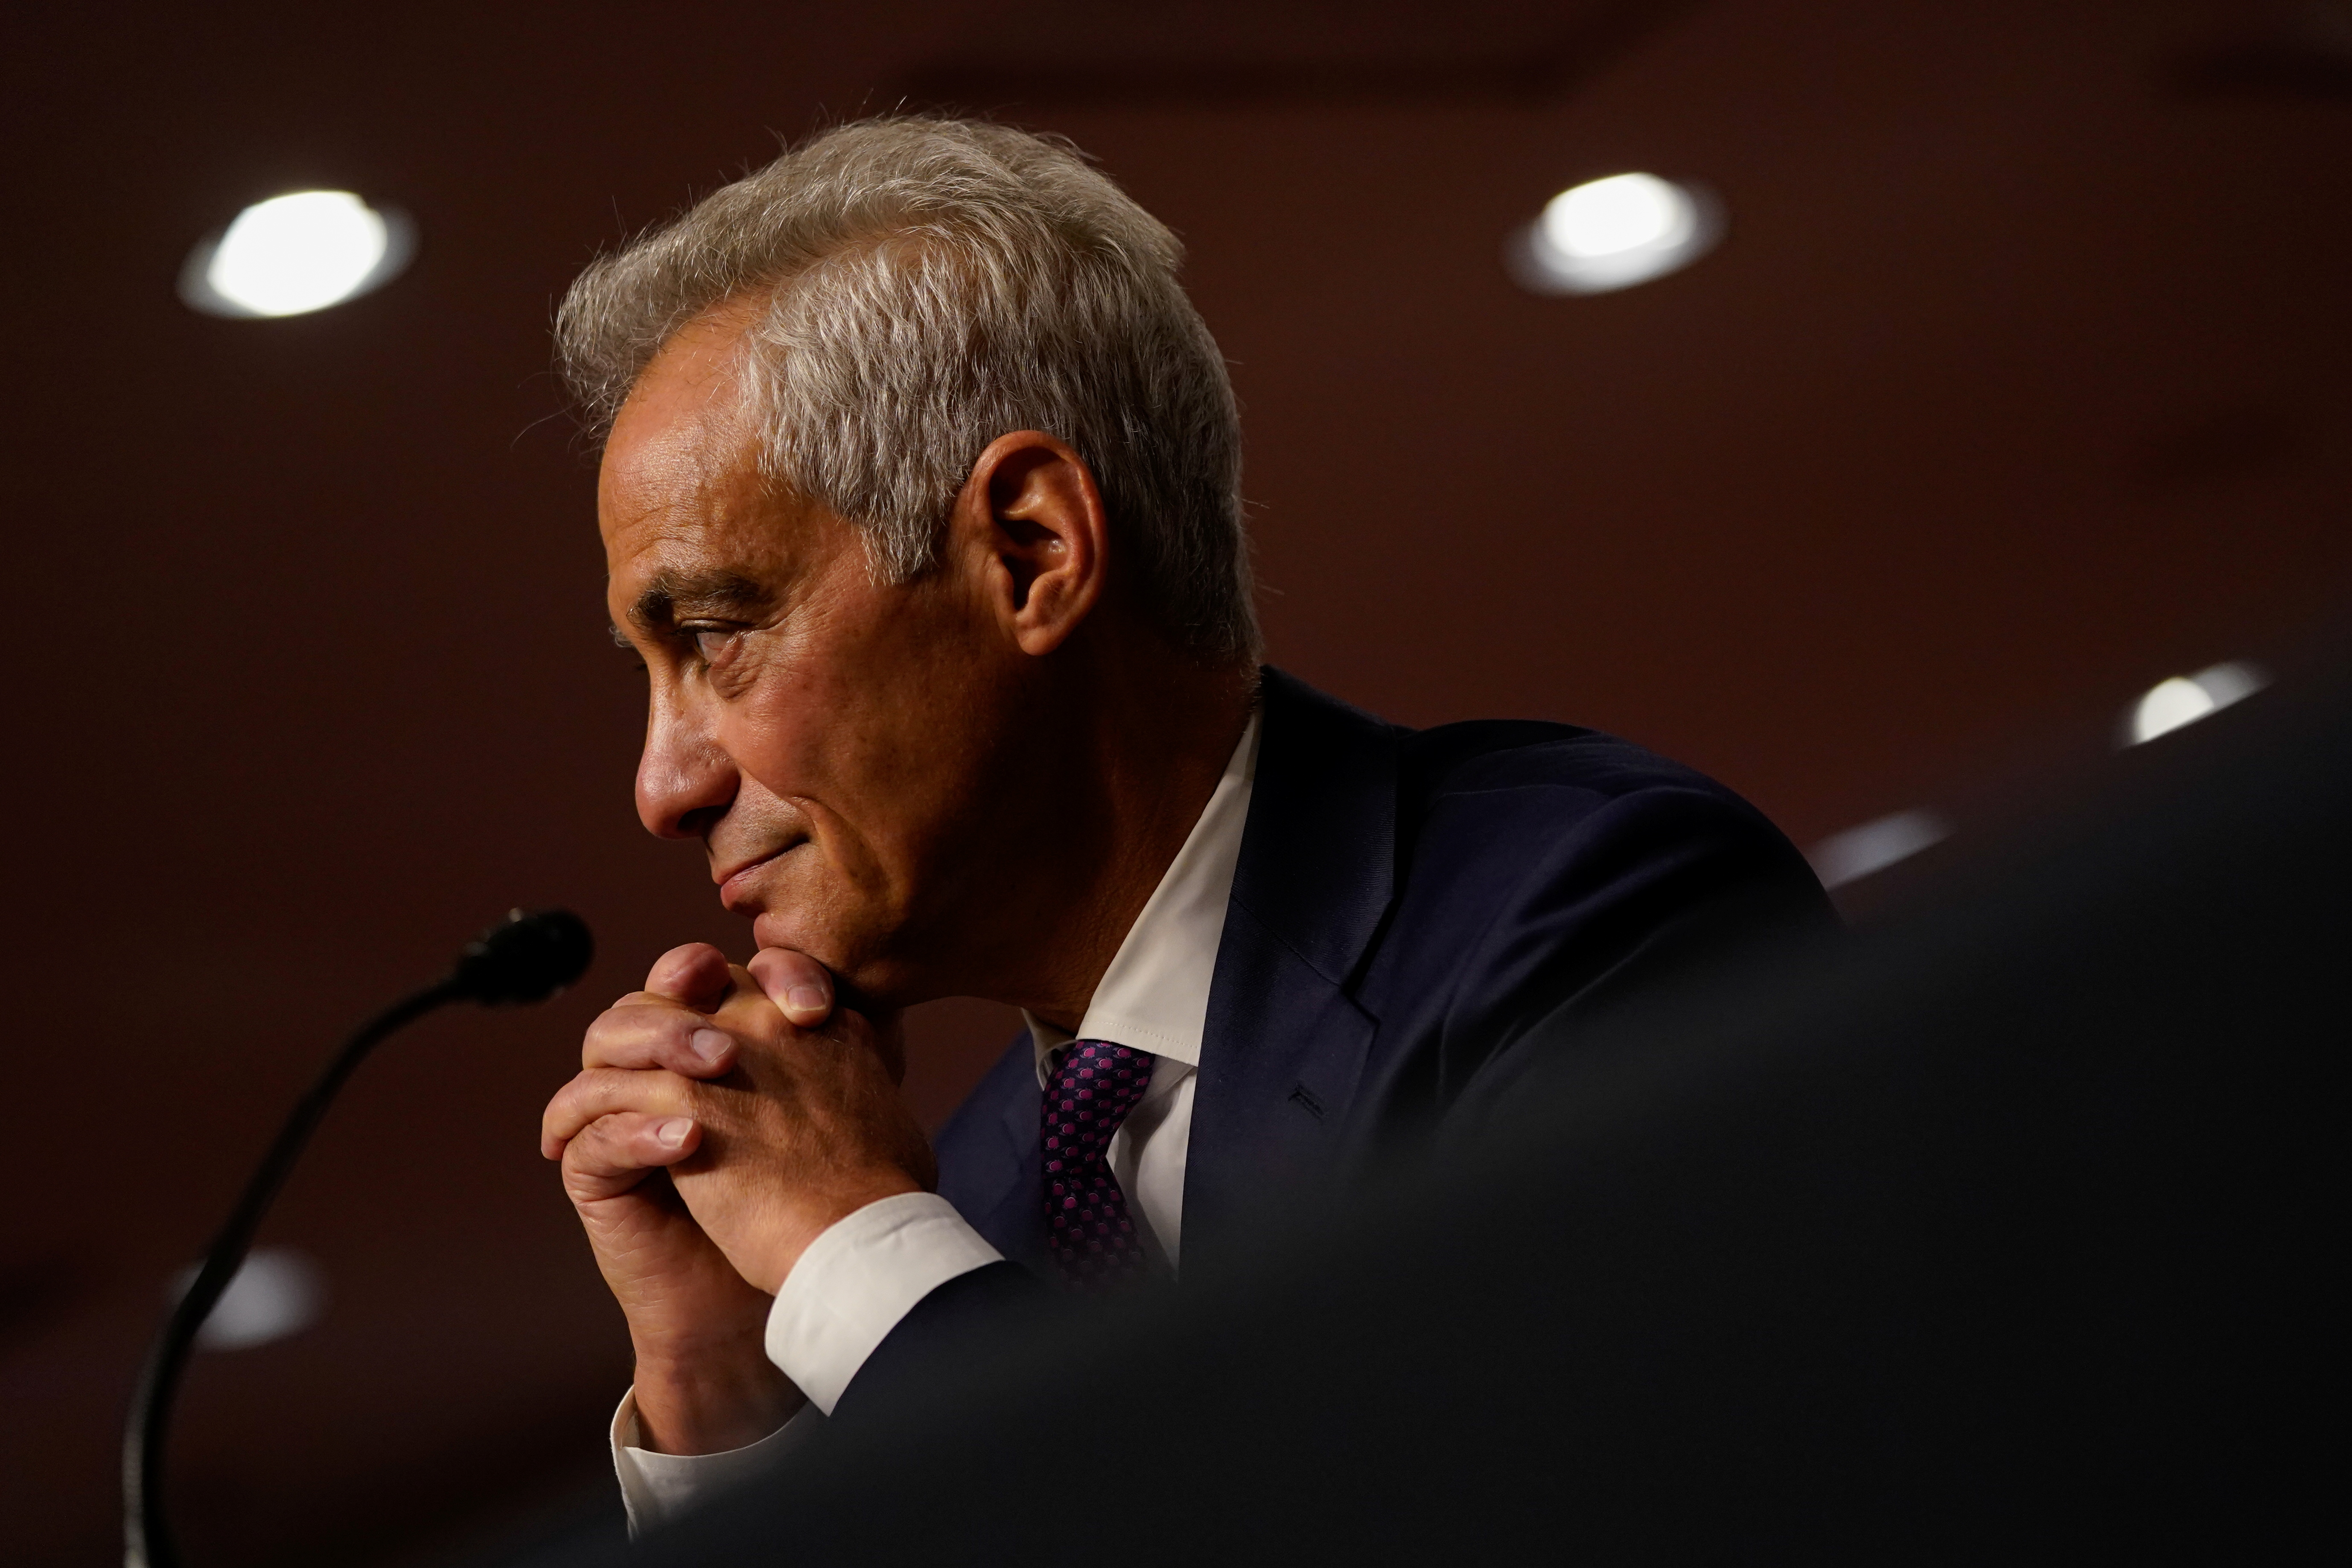 Former Chicago Mayor Rahm Emanuel listens as committee members speak during the Senate Foreign Relations Committee hearing on his nomination to be the United States Ambassador to Japan, on Capitol Hill in Washington, U.S., October 20, 2021. REUTERS/Elizabeth Frantz